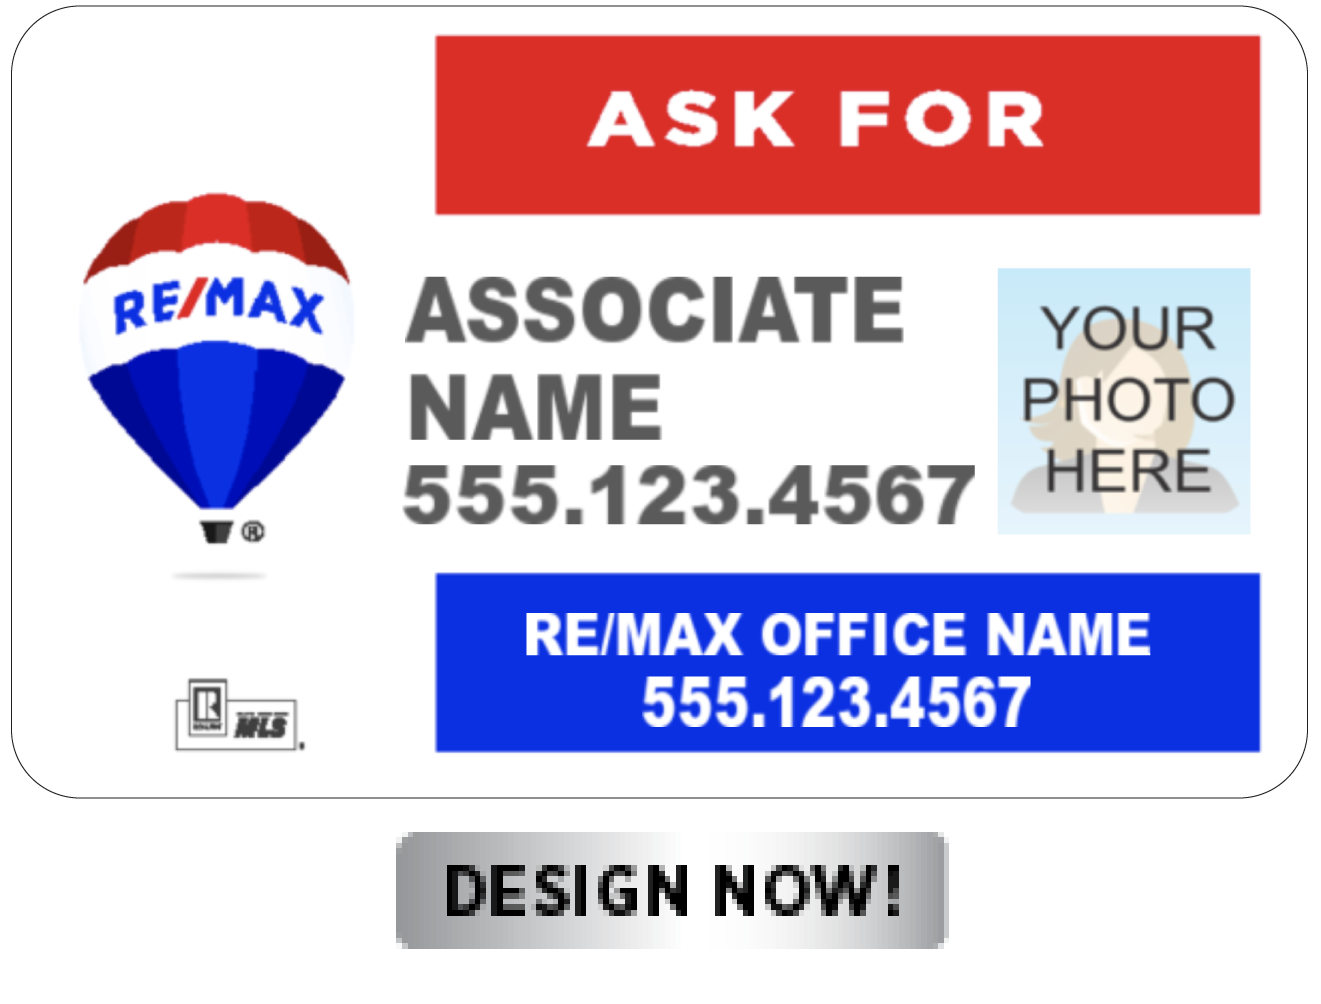 remax11x18magnetwithpicrevisedthumbnails.png